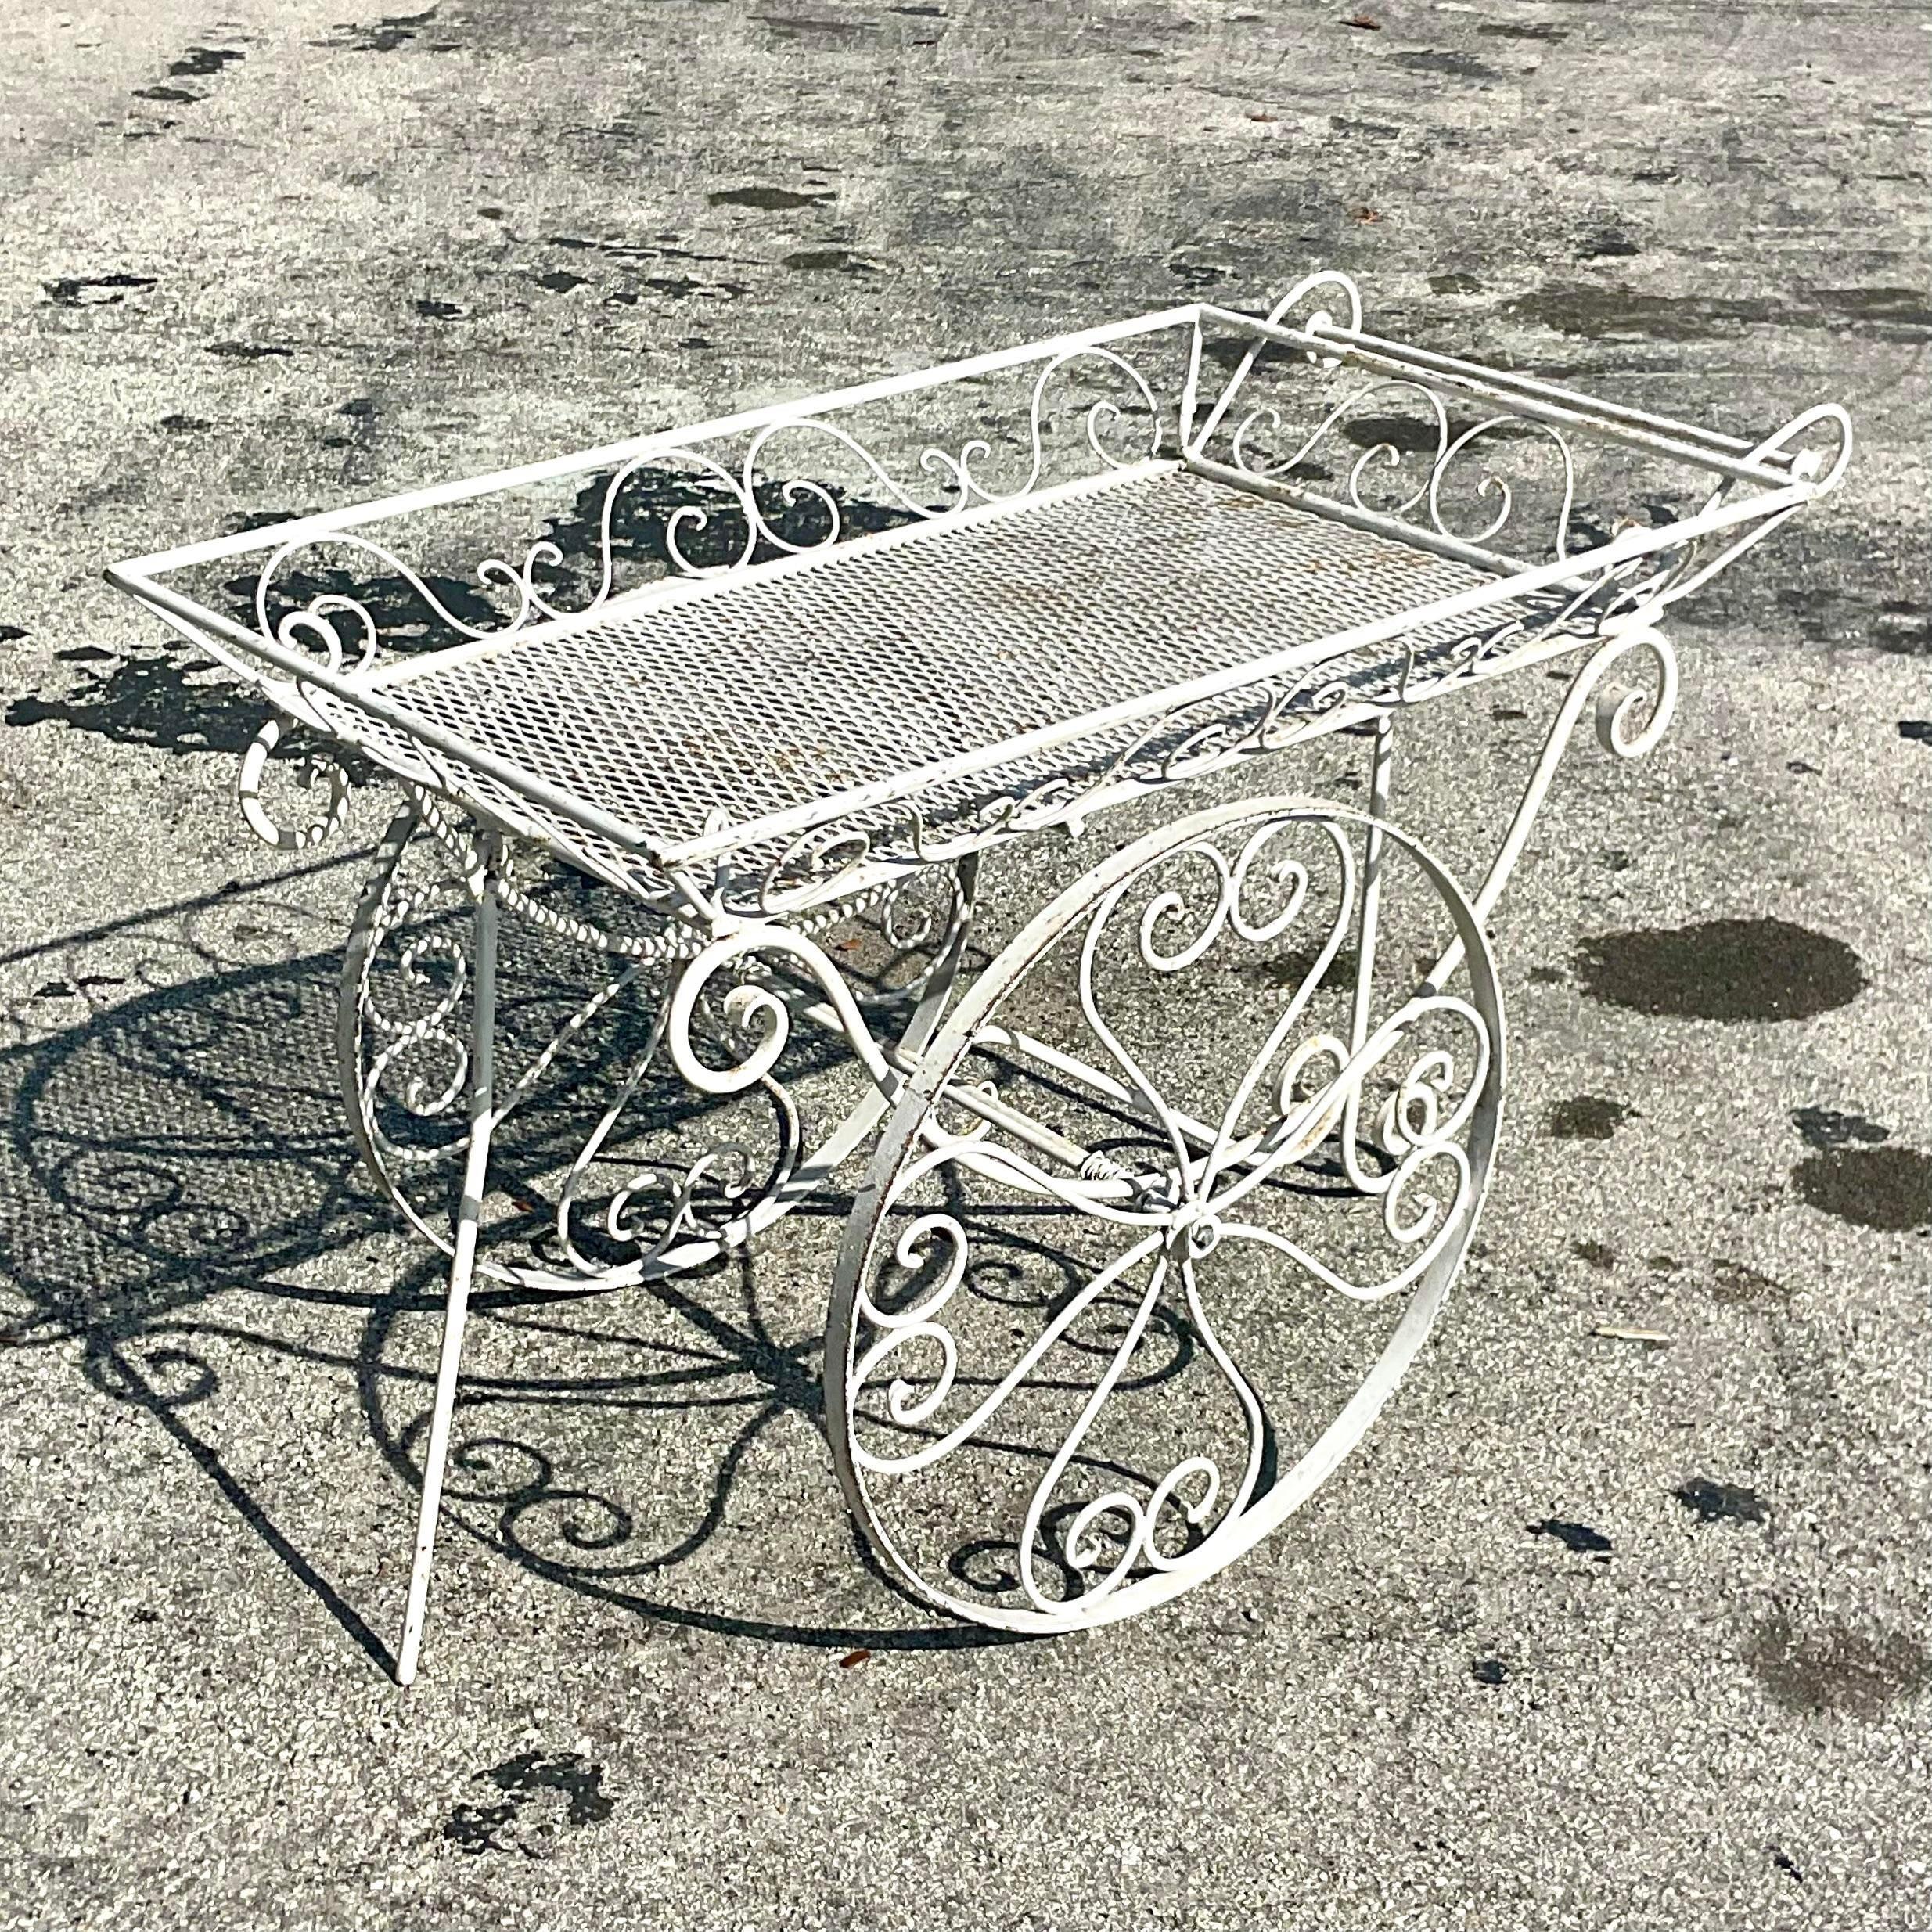 A fantastic vintage MCM bar cart. Beautiful wrought iron with a fabulous big wheel design. Acquired from a Palm Beach estate.